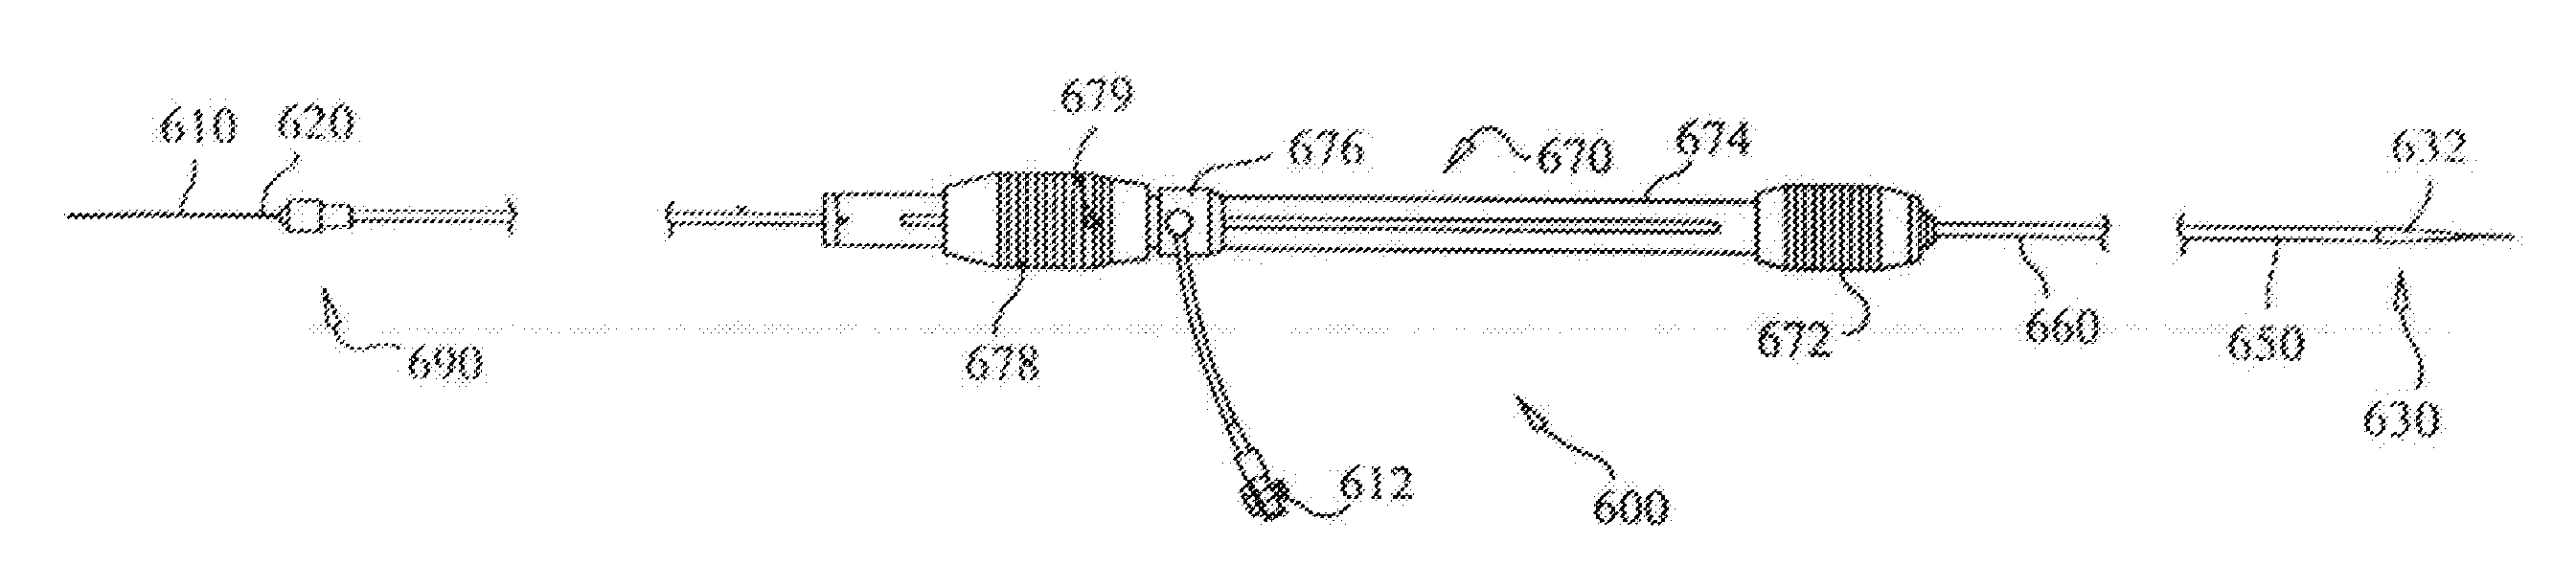 Method for Operating a Stent Graft Delivery System Handle